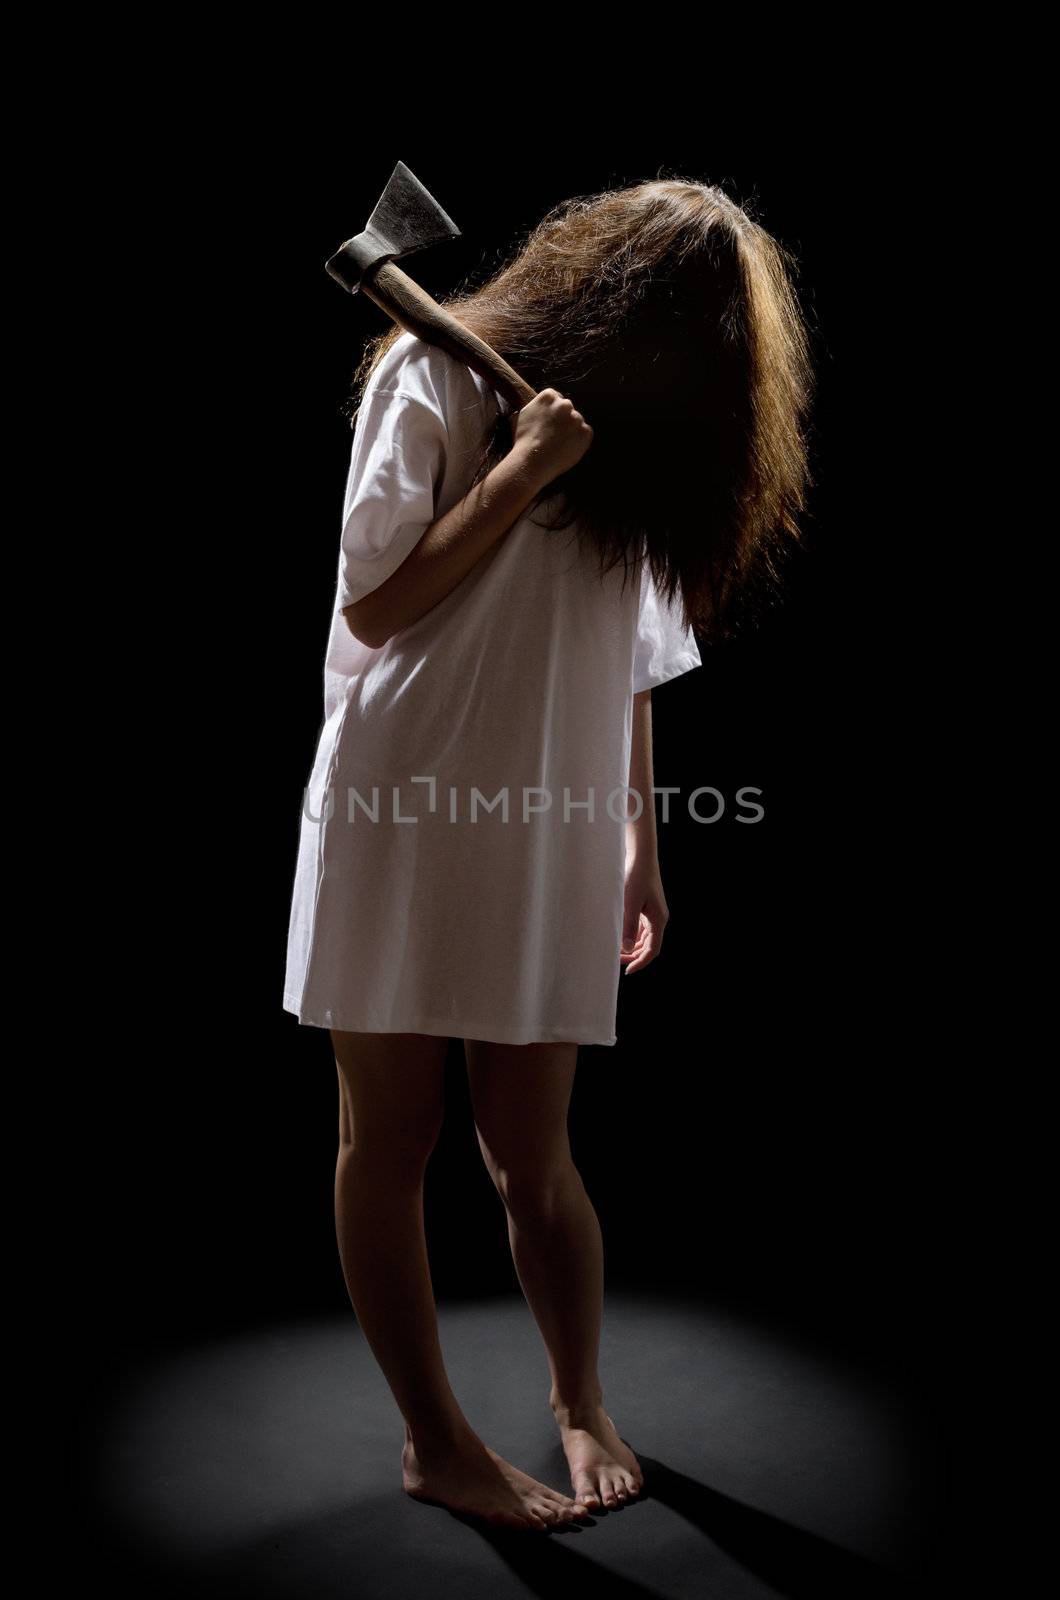 Zombie girl with axe on black